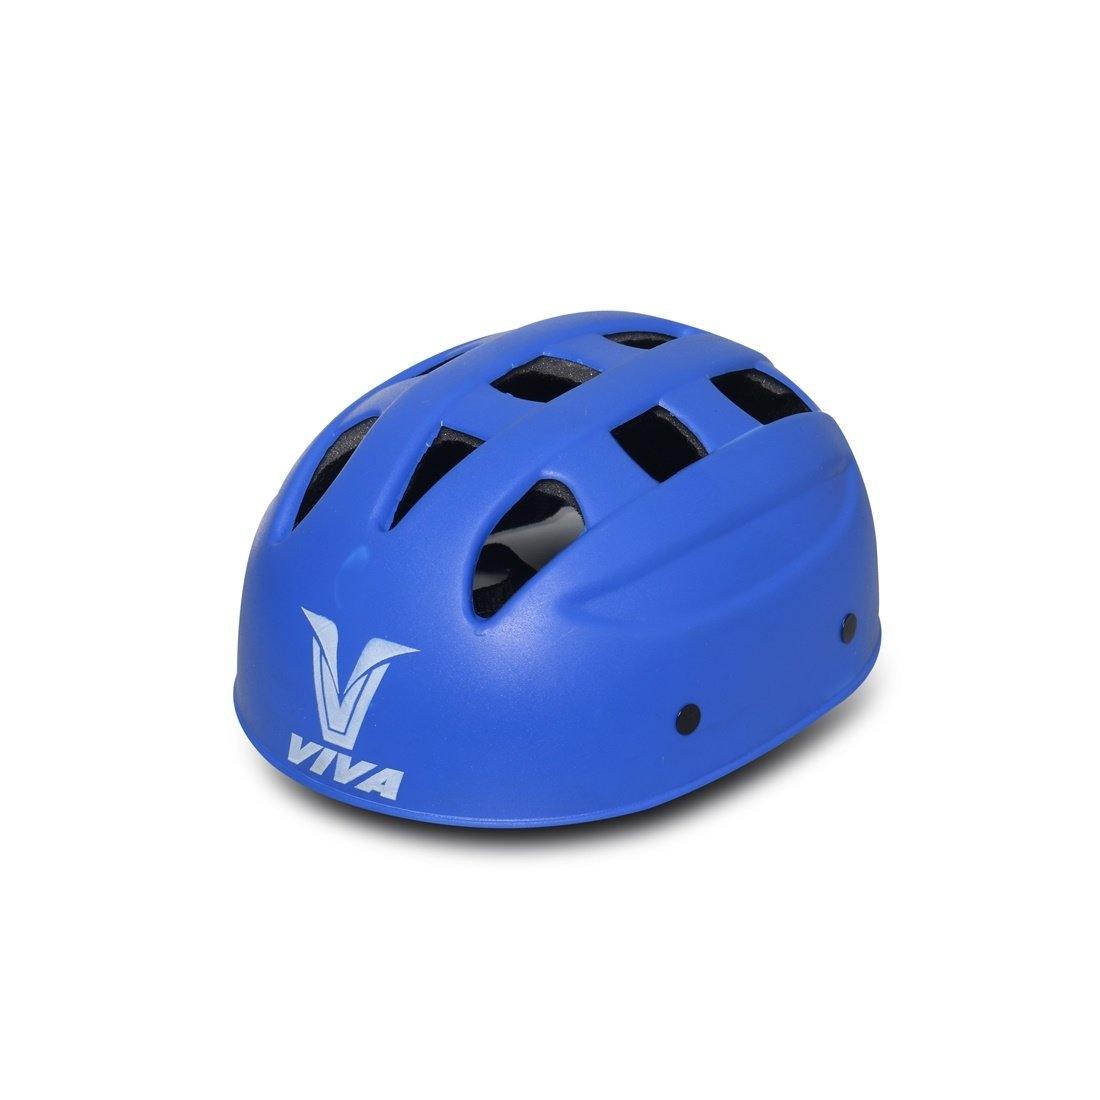 Viva 4 in 1 Protective Set for Skating and Cycling (Blue) - Best Price online Prokicksports.com